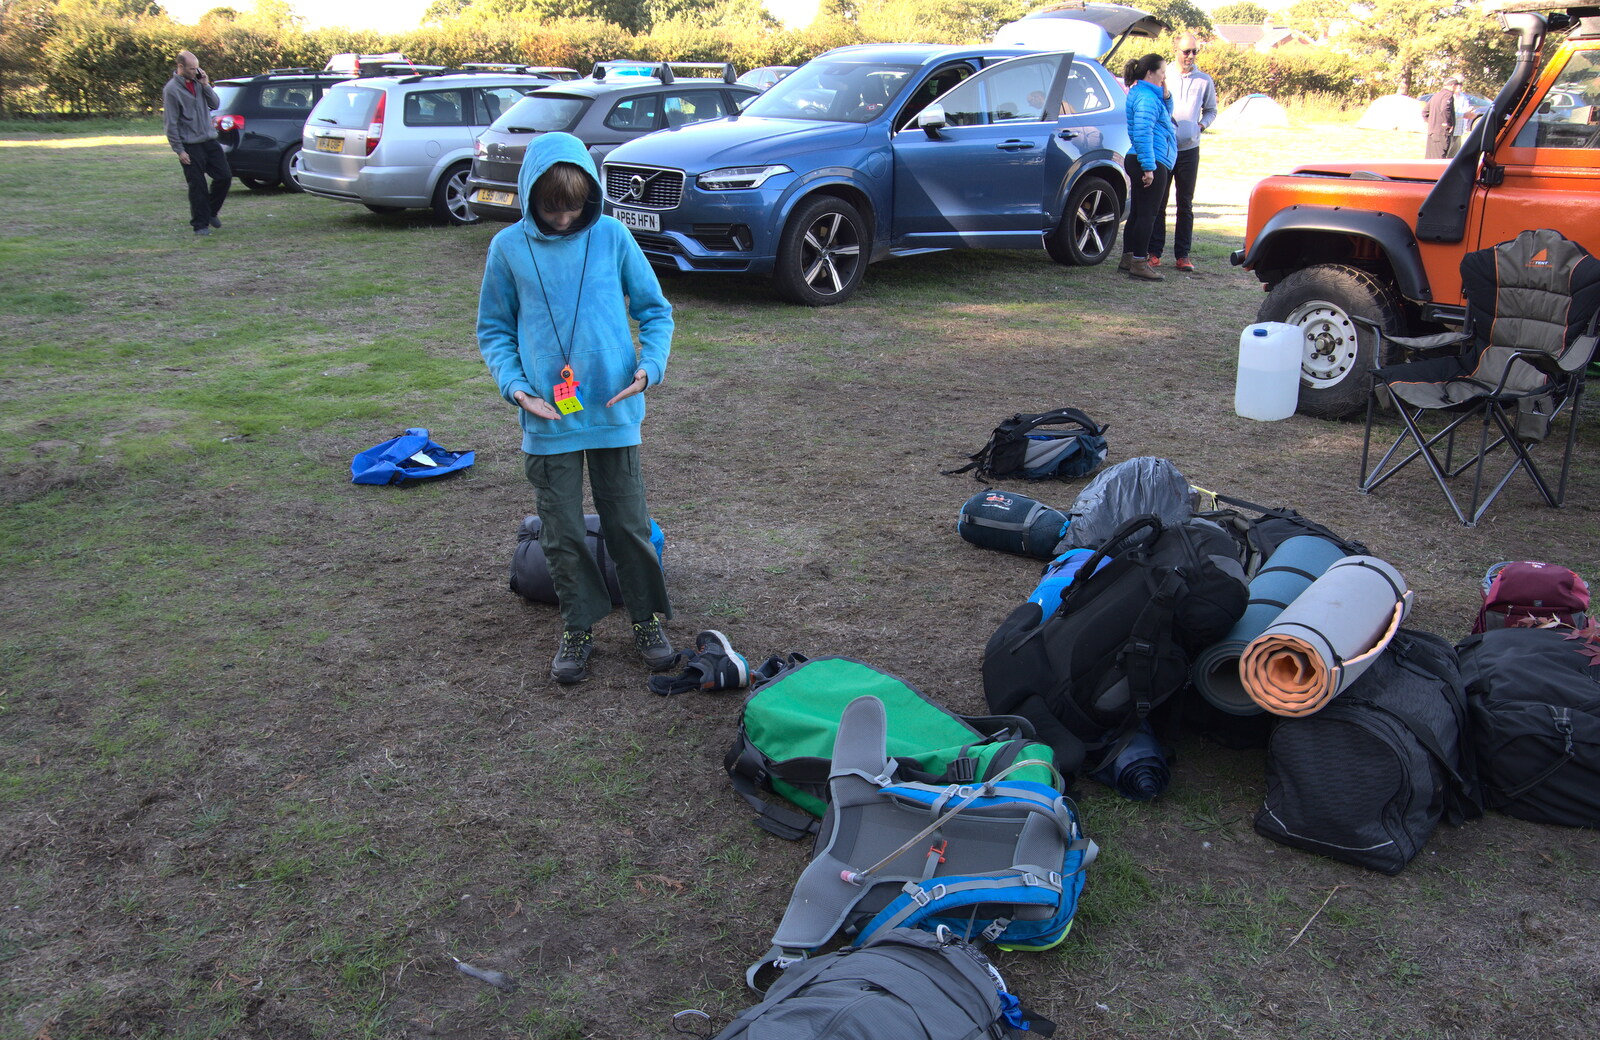 Harry's Scout Hike, Walberswick and Dunwich, Suffolk - 9th October 2022: Harry stands around a pile of camping gear